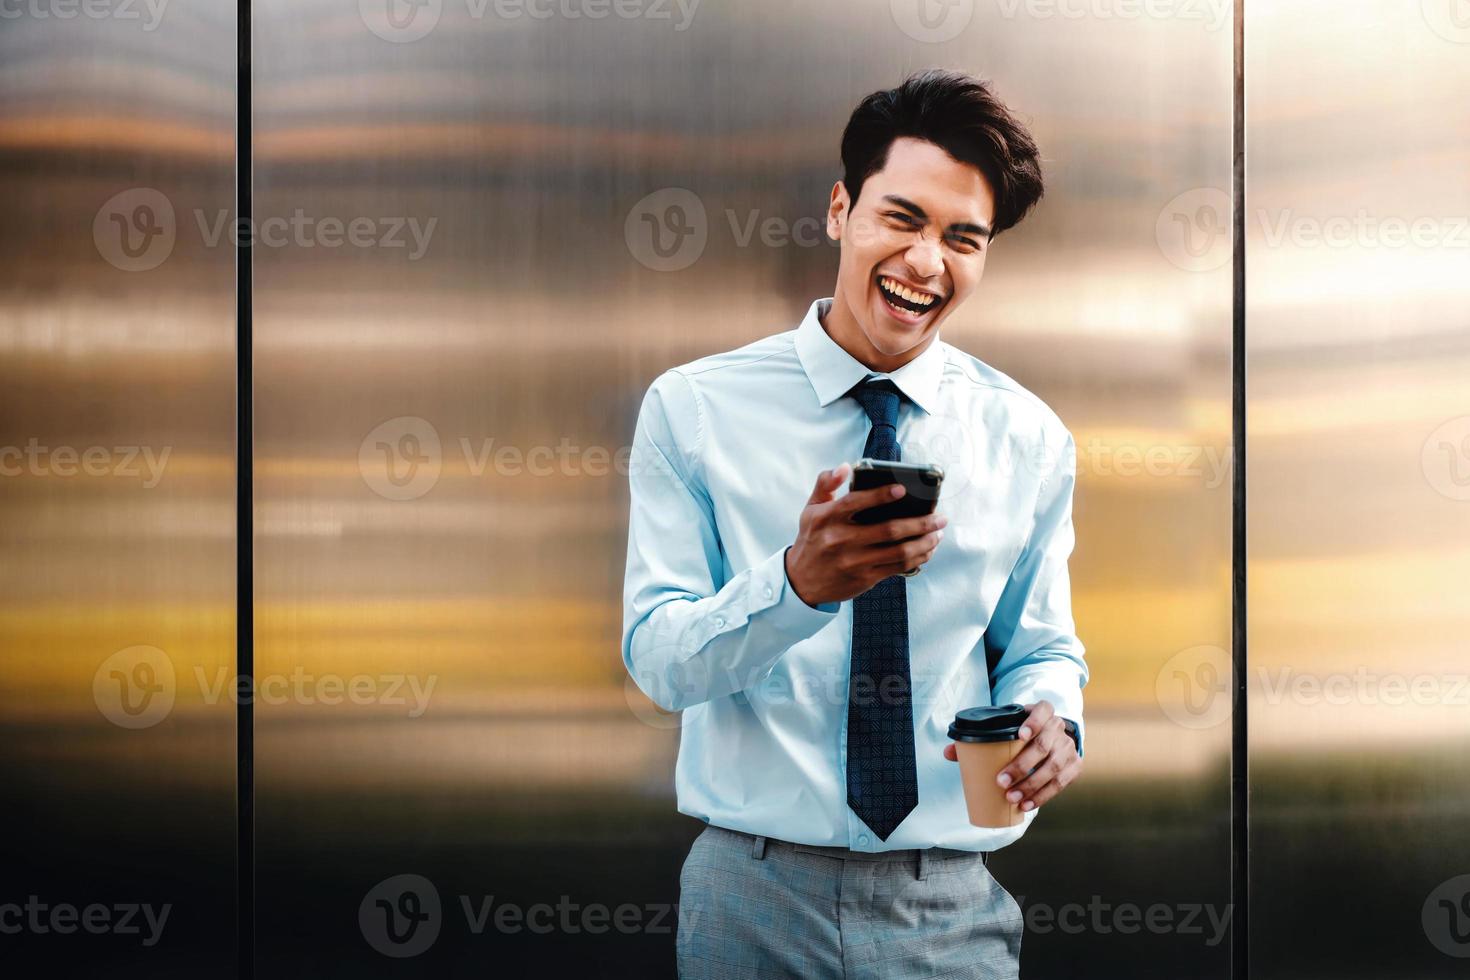 Portrait of a Happy Young Businessman Using Mobile Phone in the Urban City. Lifestyle of Modern People. Front View. looking at Camera. Standing by the Wall with Coffee Cup photo